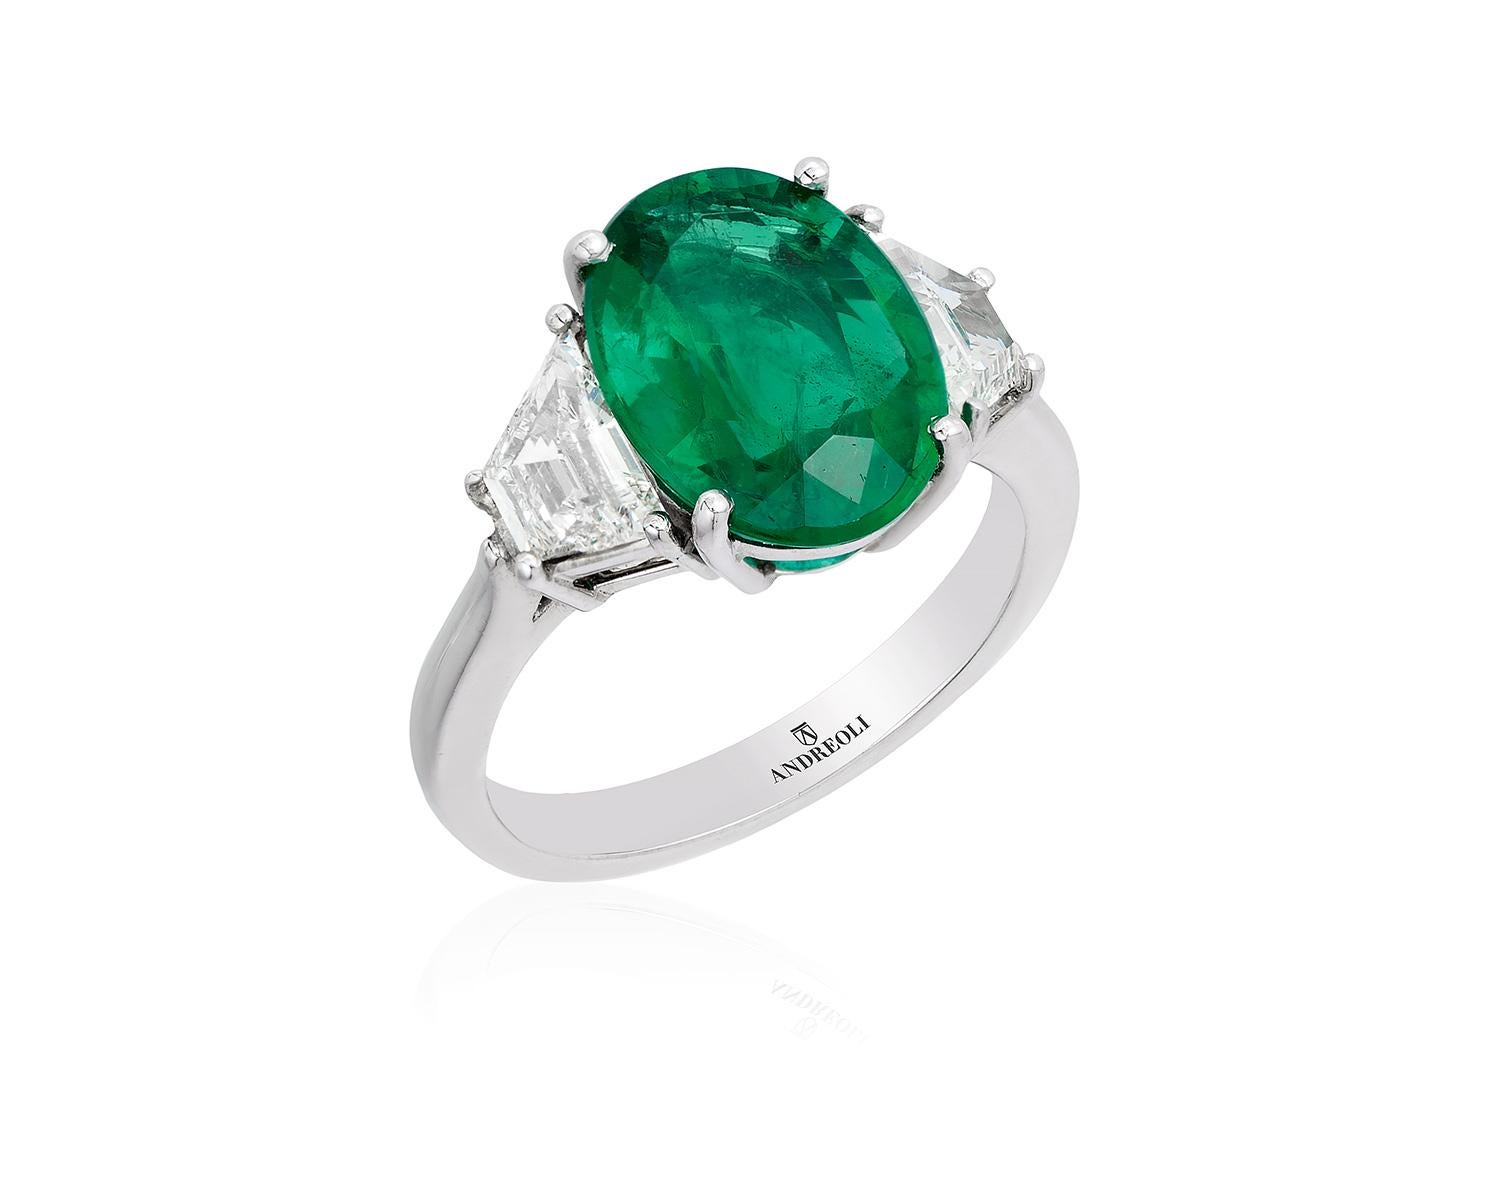 Andreoli CDC Certified 4.05 Carat Zambian Emerald Diamond Platinum Ring. This Ring features 1.02 carat F-G Color VS-SI Clarity Trapezoid step cut diamonds and a 4.05 carat oval Zambian CDC certified vivid green emerald with minor oil. Set in 8.87